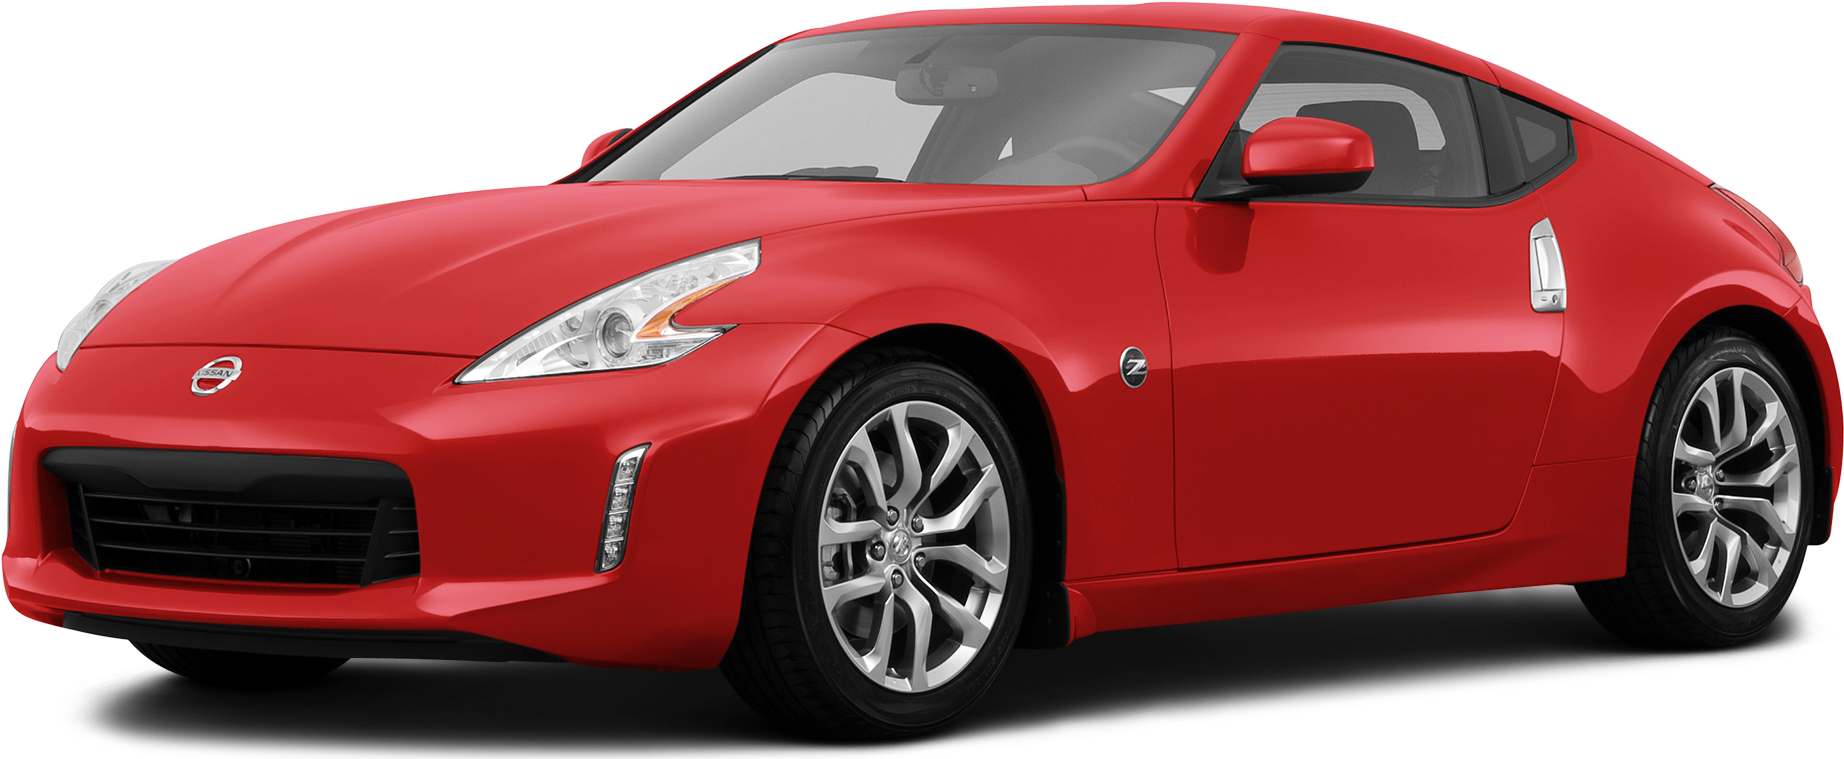 Car Lease Deals In Lee Ma